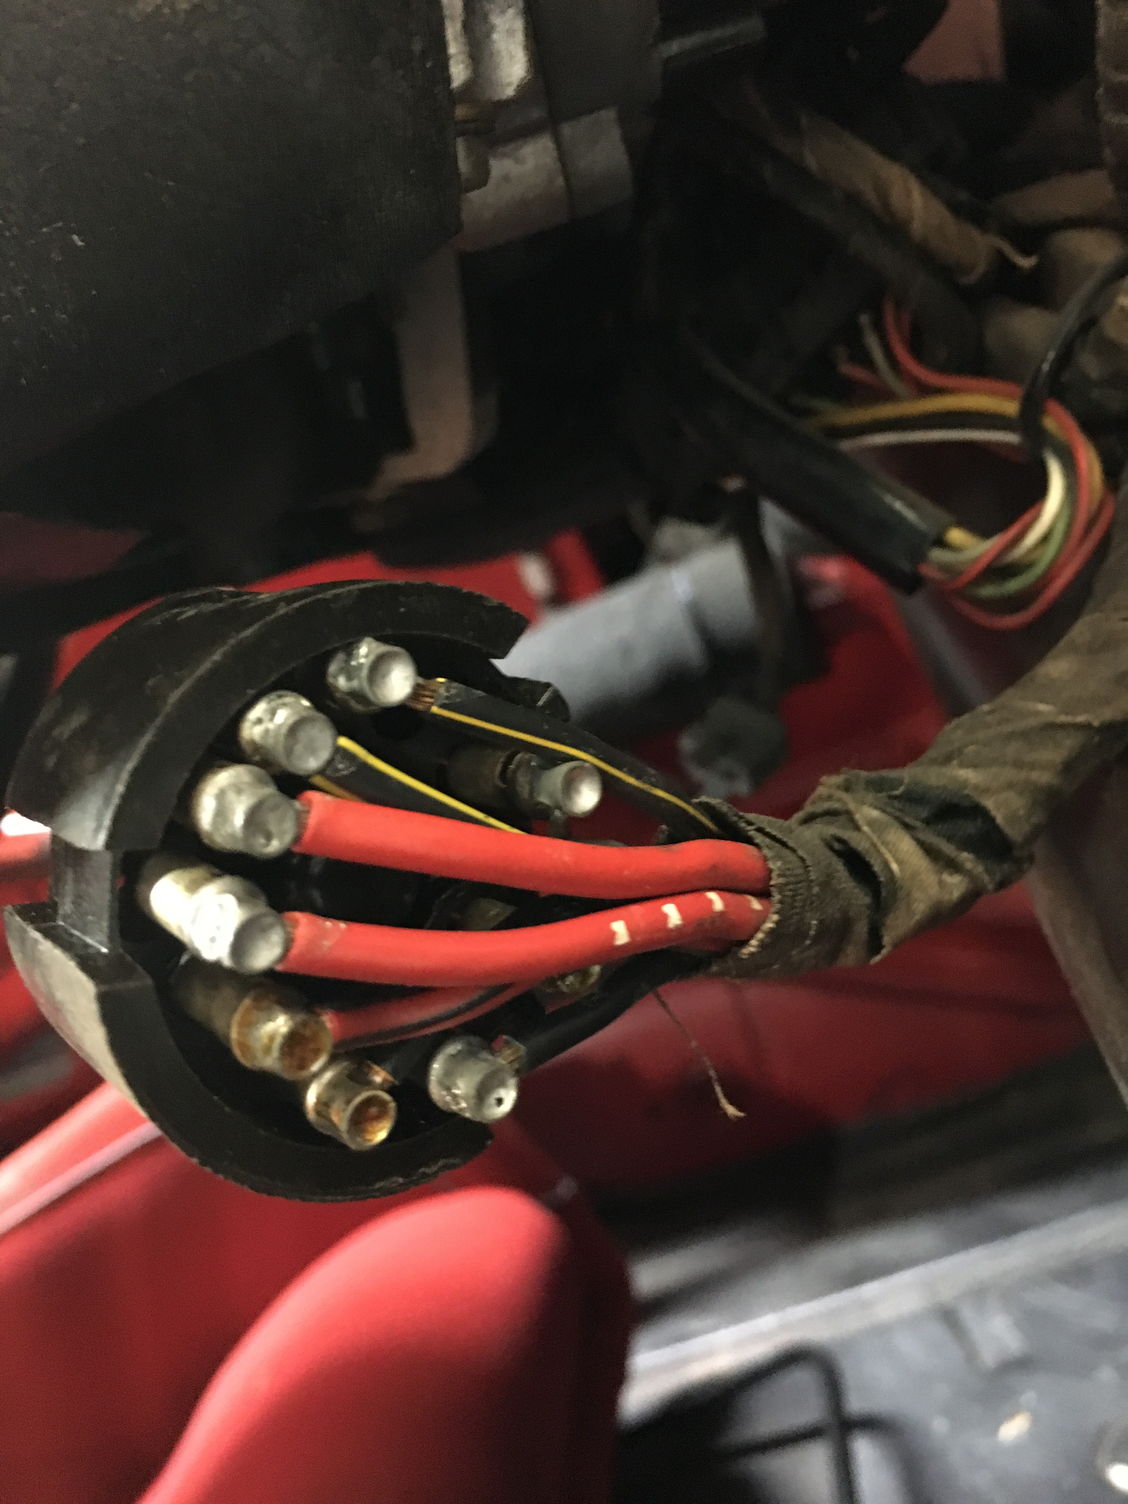 Ignition switch wiring, what color goes to what? - Rennlist - Porsche